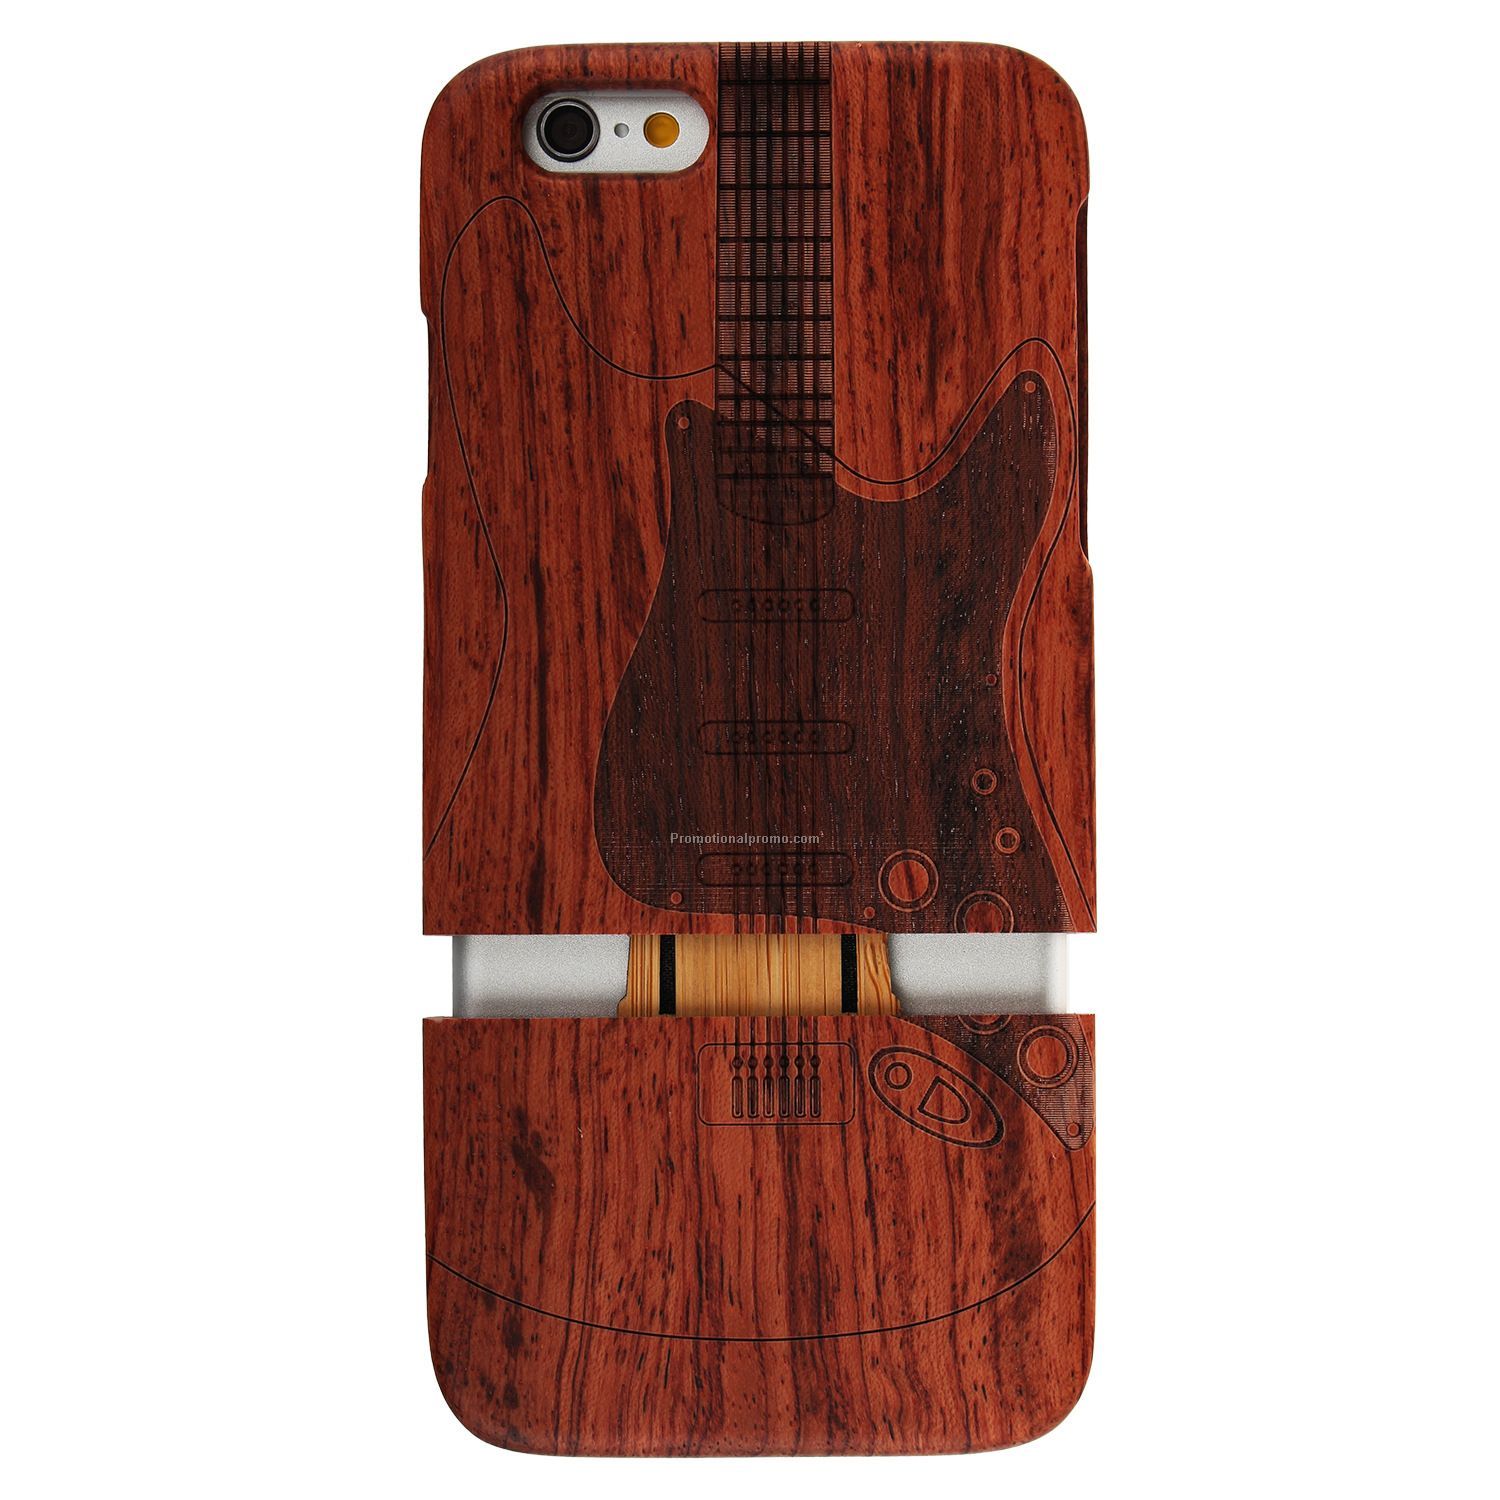 Genuine painting wood case for iphone 6 6plus, detachable wood case